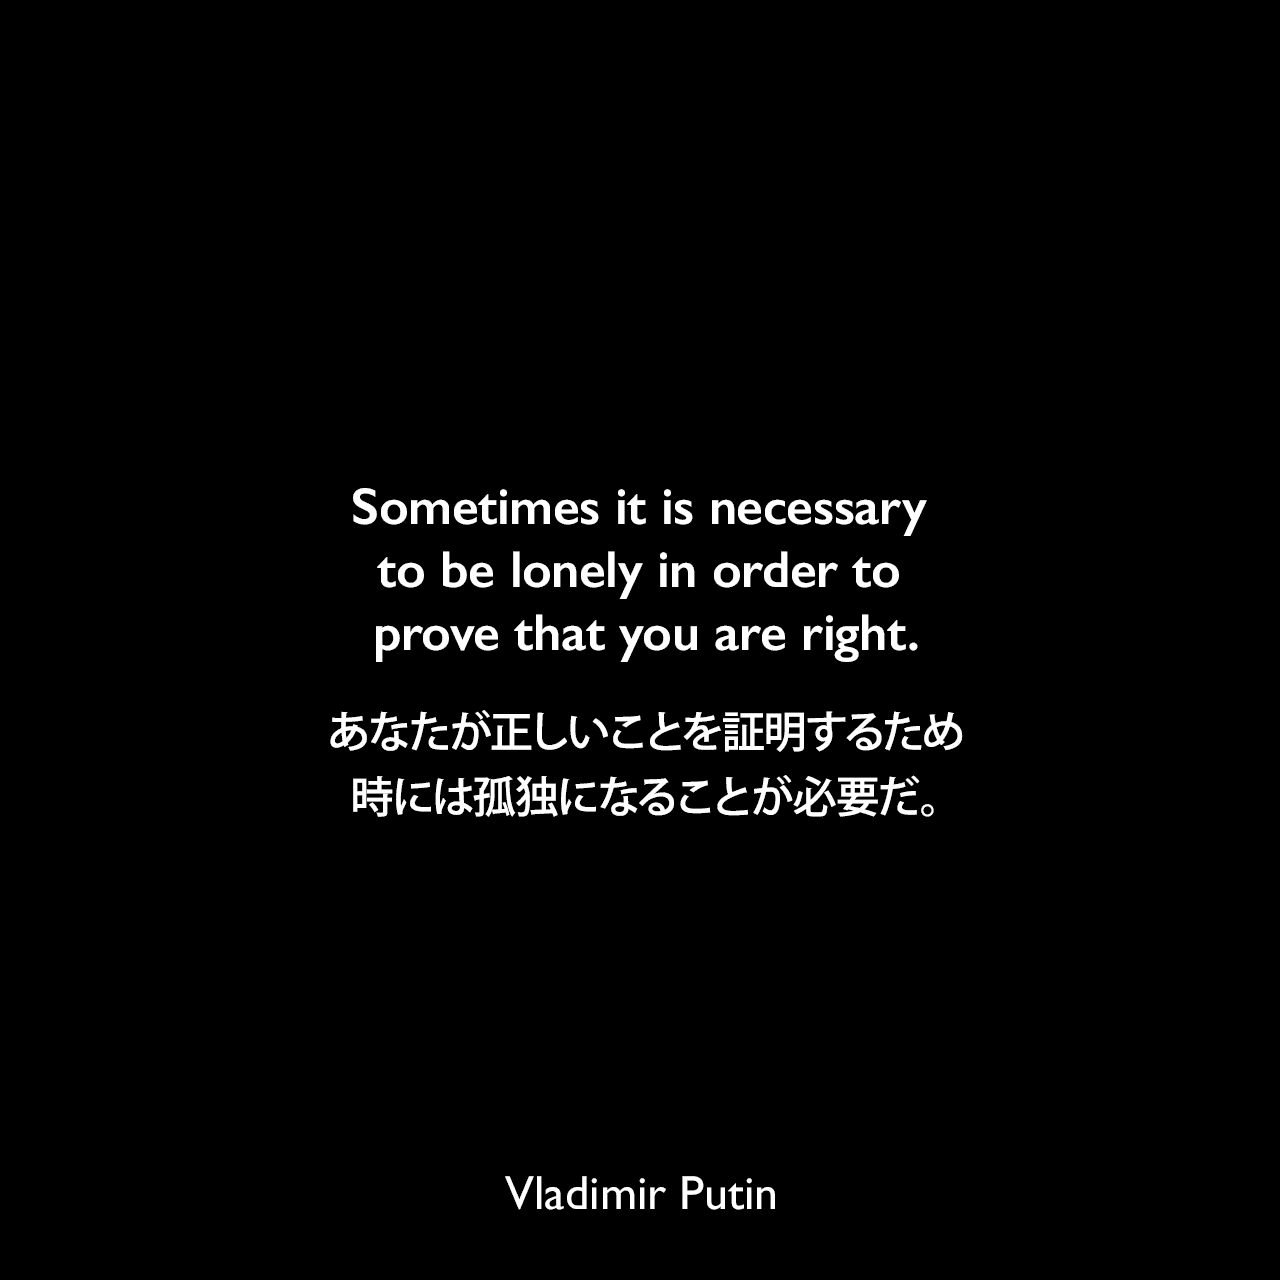 Sometimes it is necessary to be lonely in order to prove that you are right.あなたが正しいことを証明するため、時には孤独になることが必要だ。Vladimir Putin